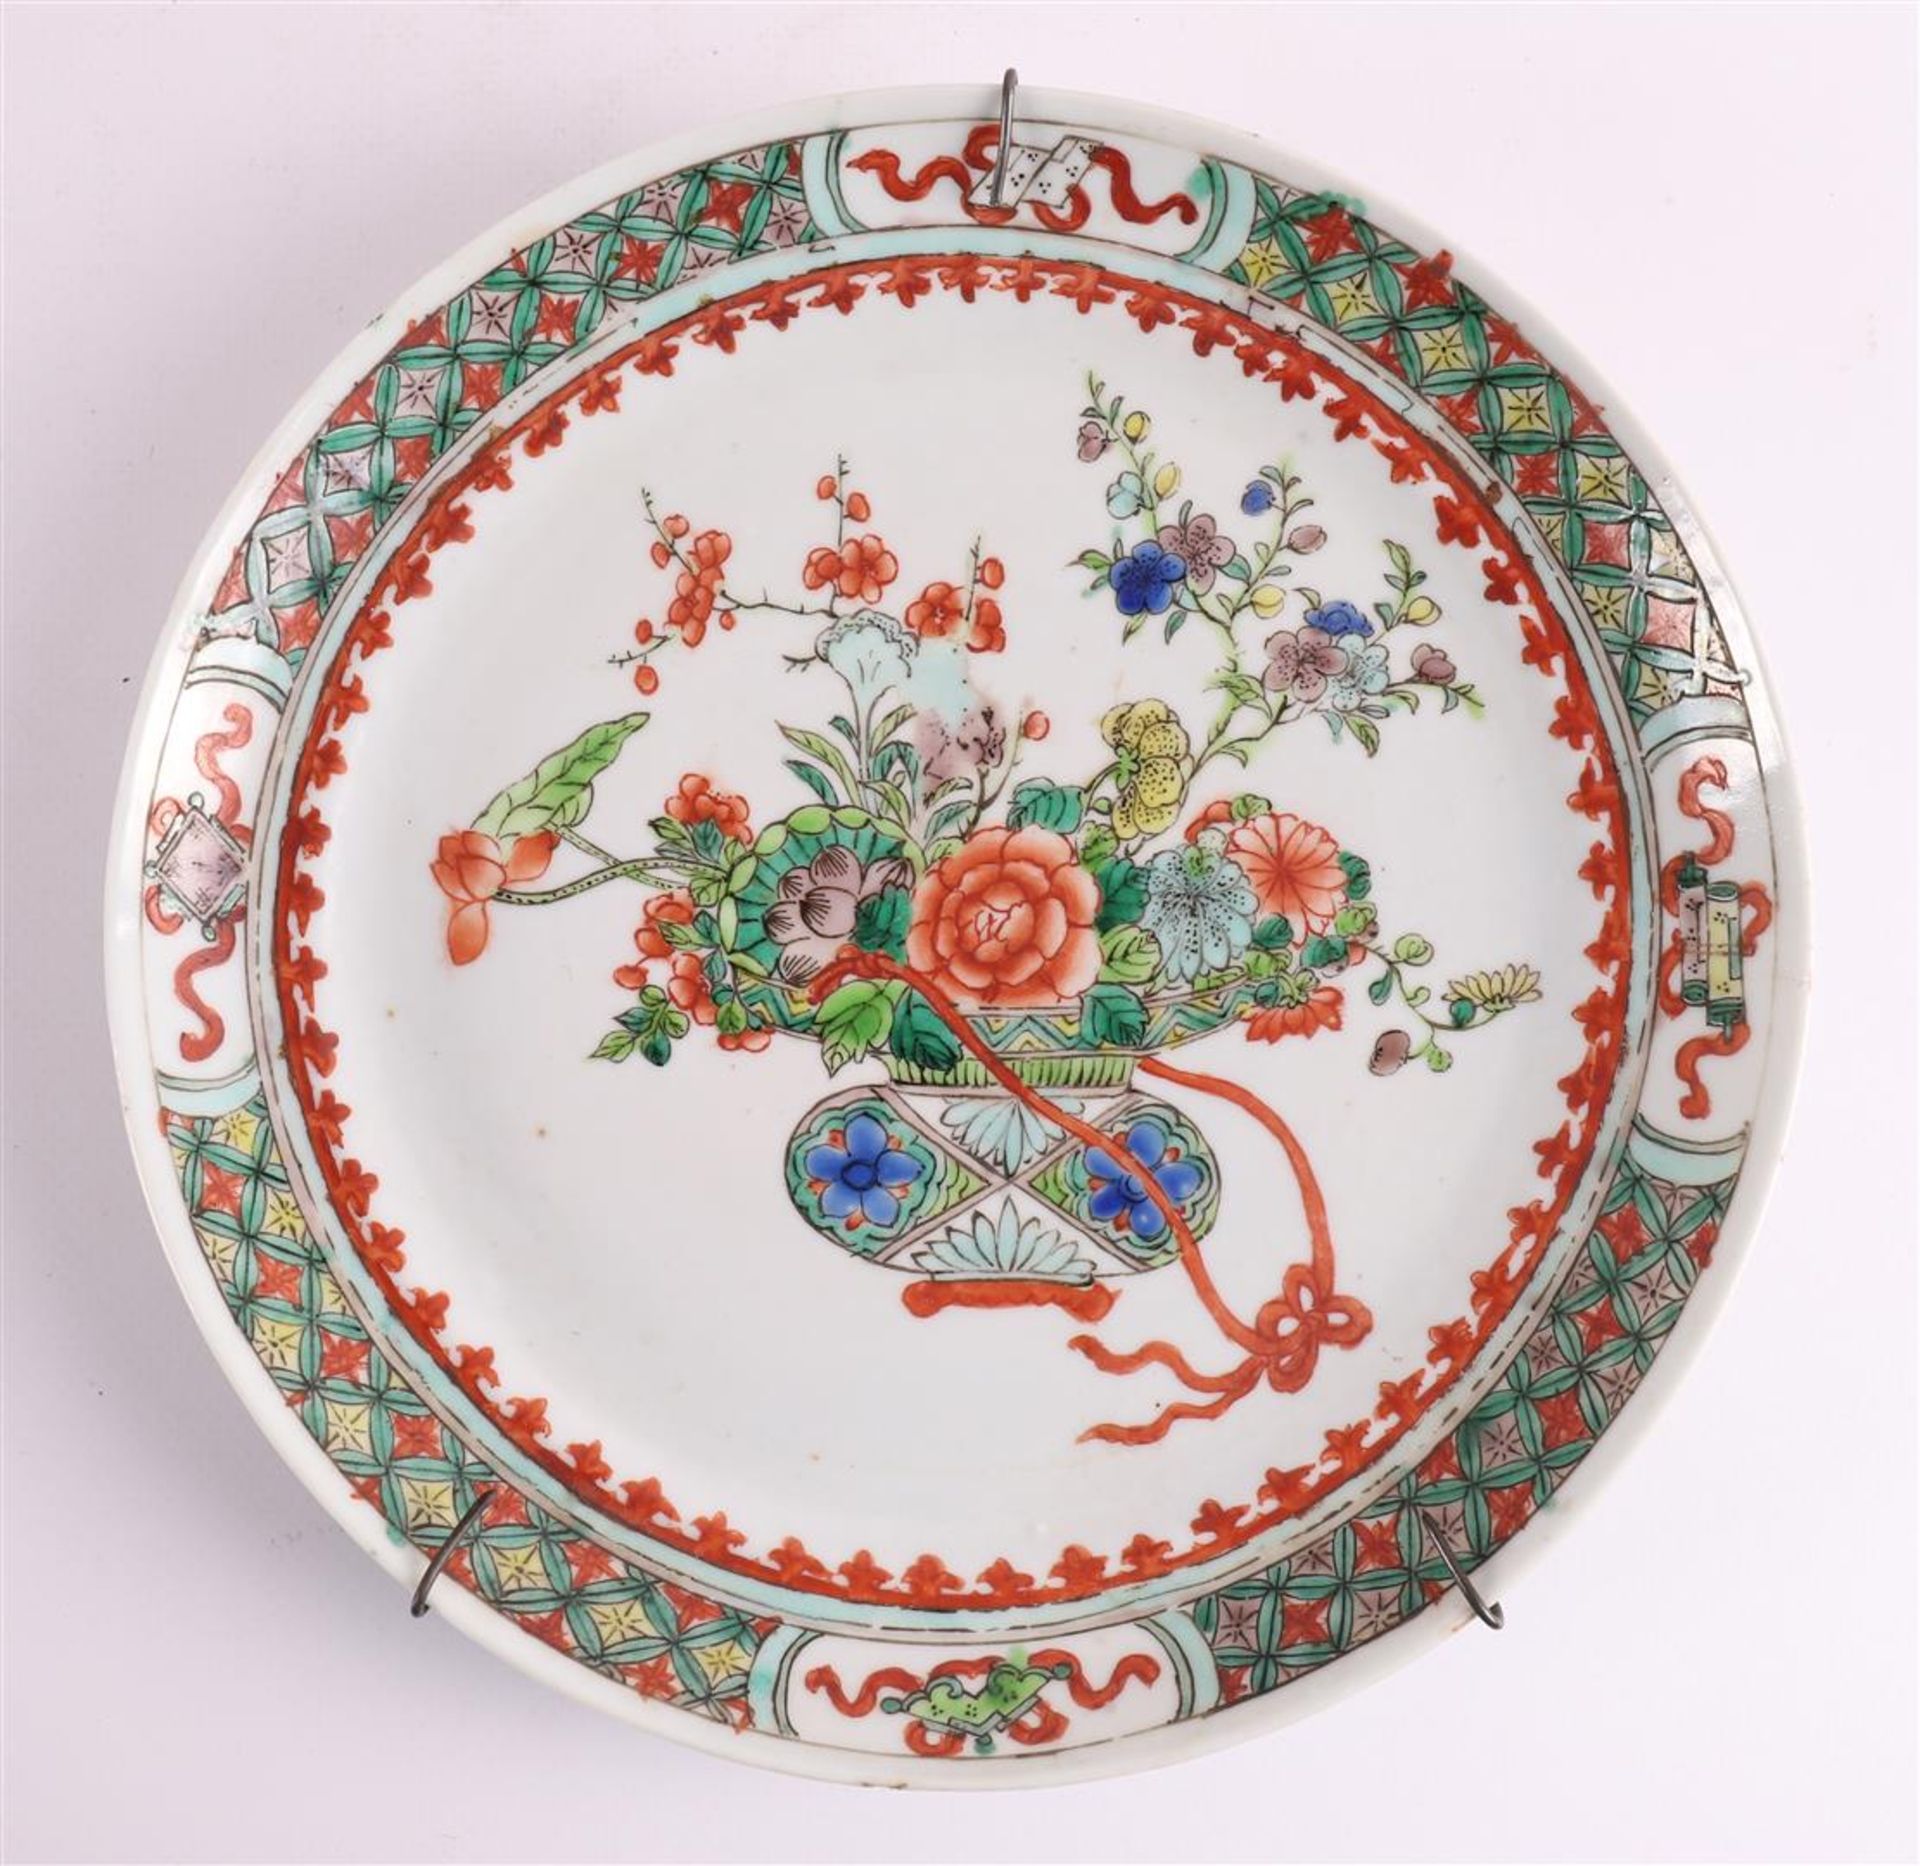 A porcelain famille verte porcelain plate, China, 19th century. - Image 2 of 3